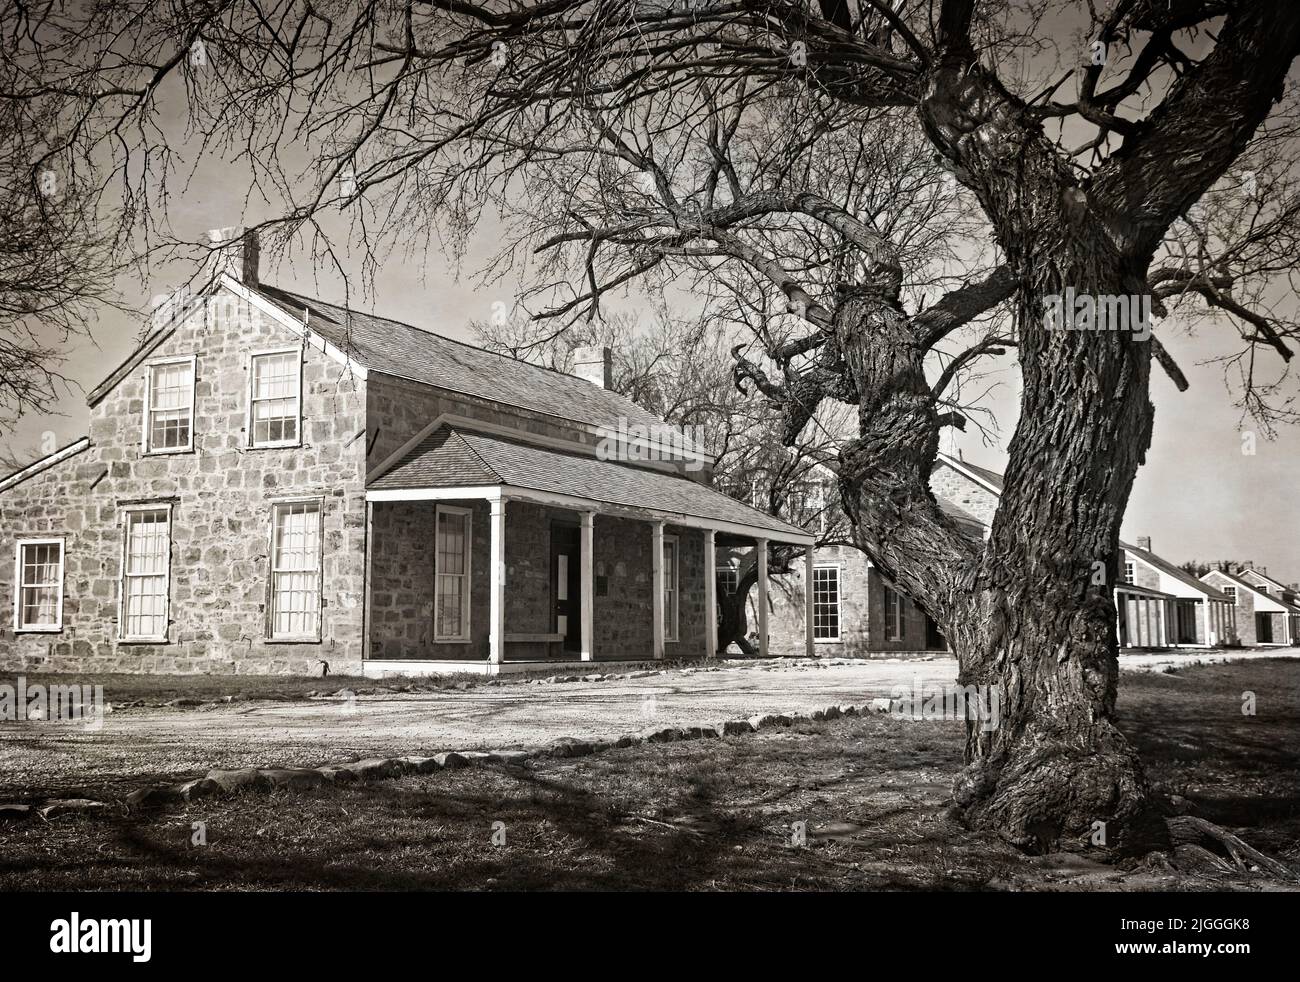 Officer's Quarters at Fort Concho, Texas, USA: Black and white image with prominent tree in foreground and stone building  in the background. Stock Photo